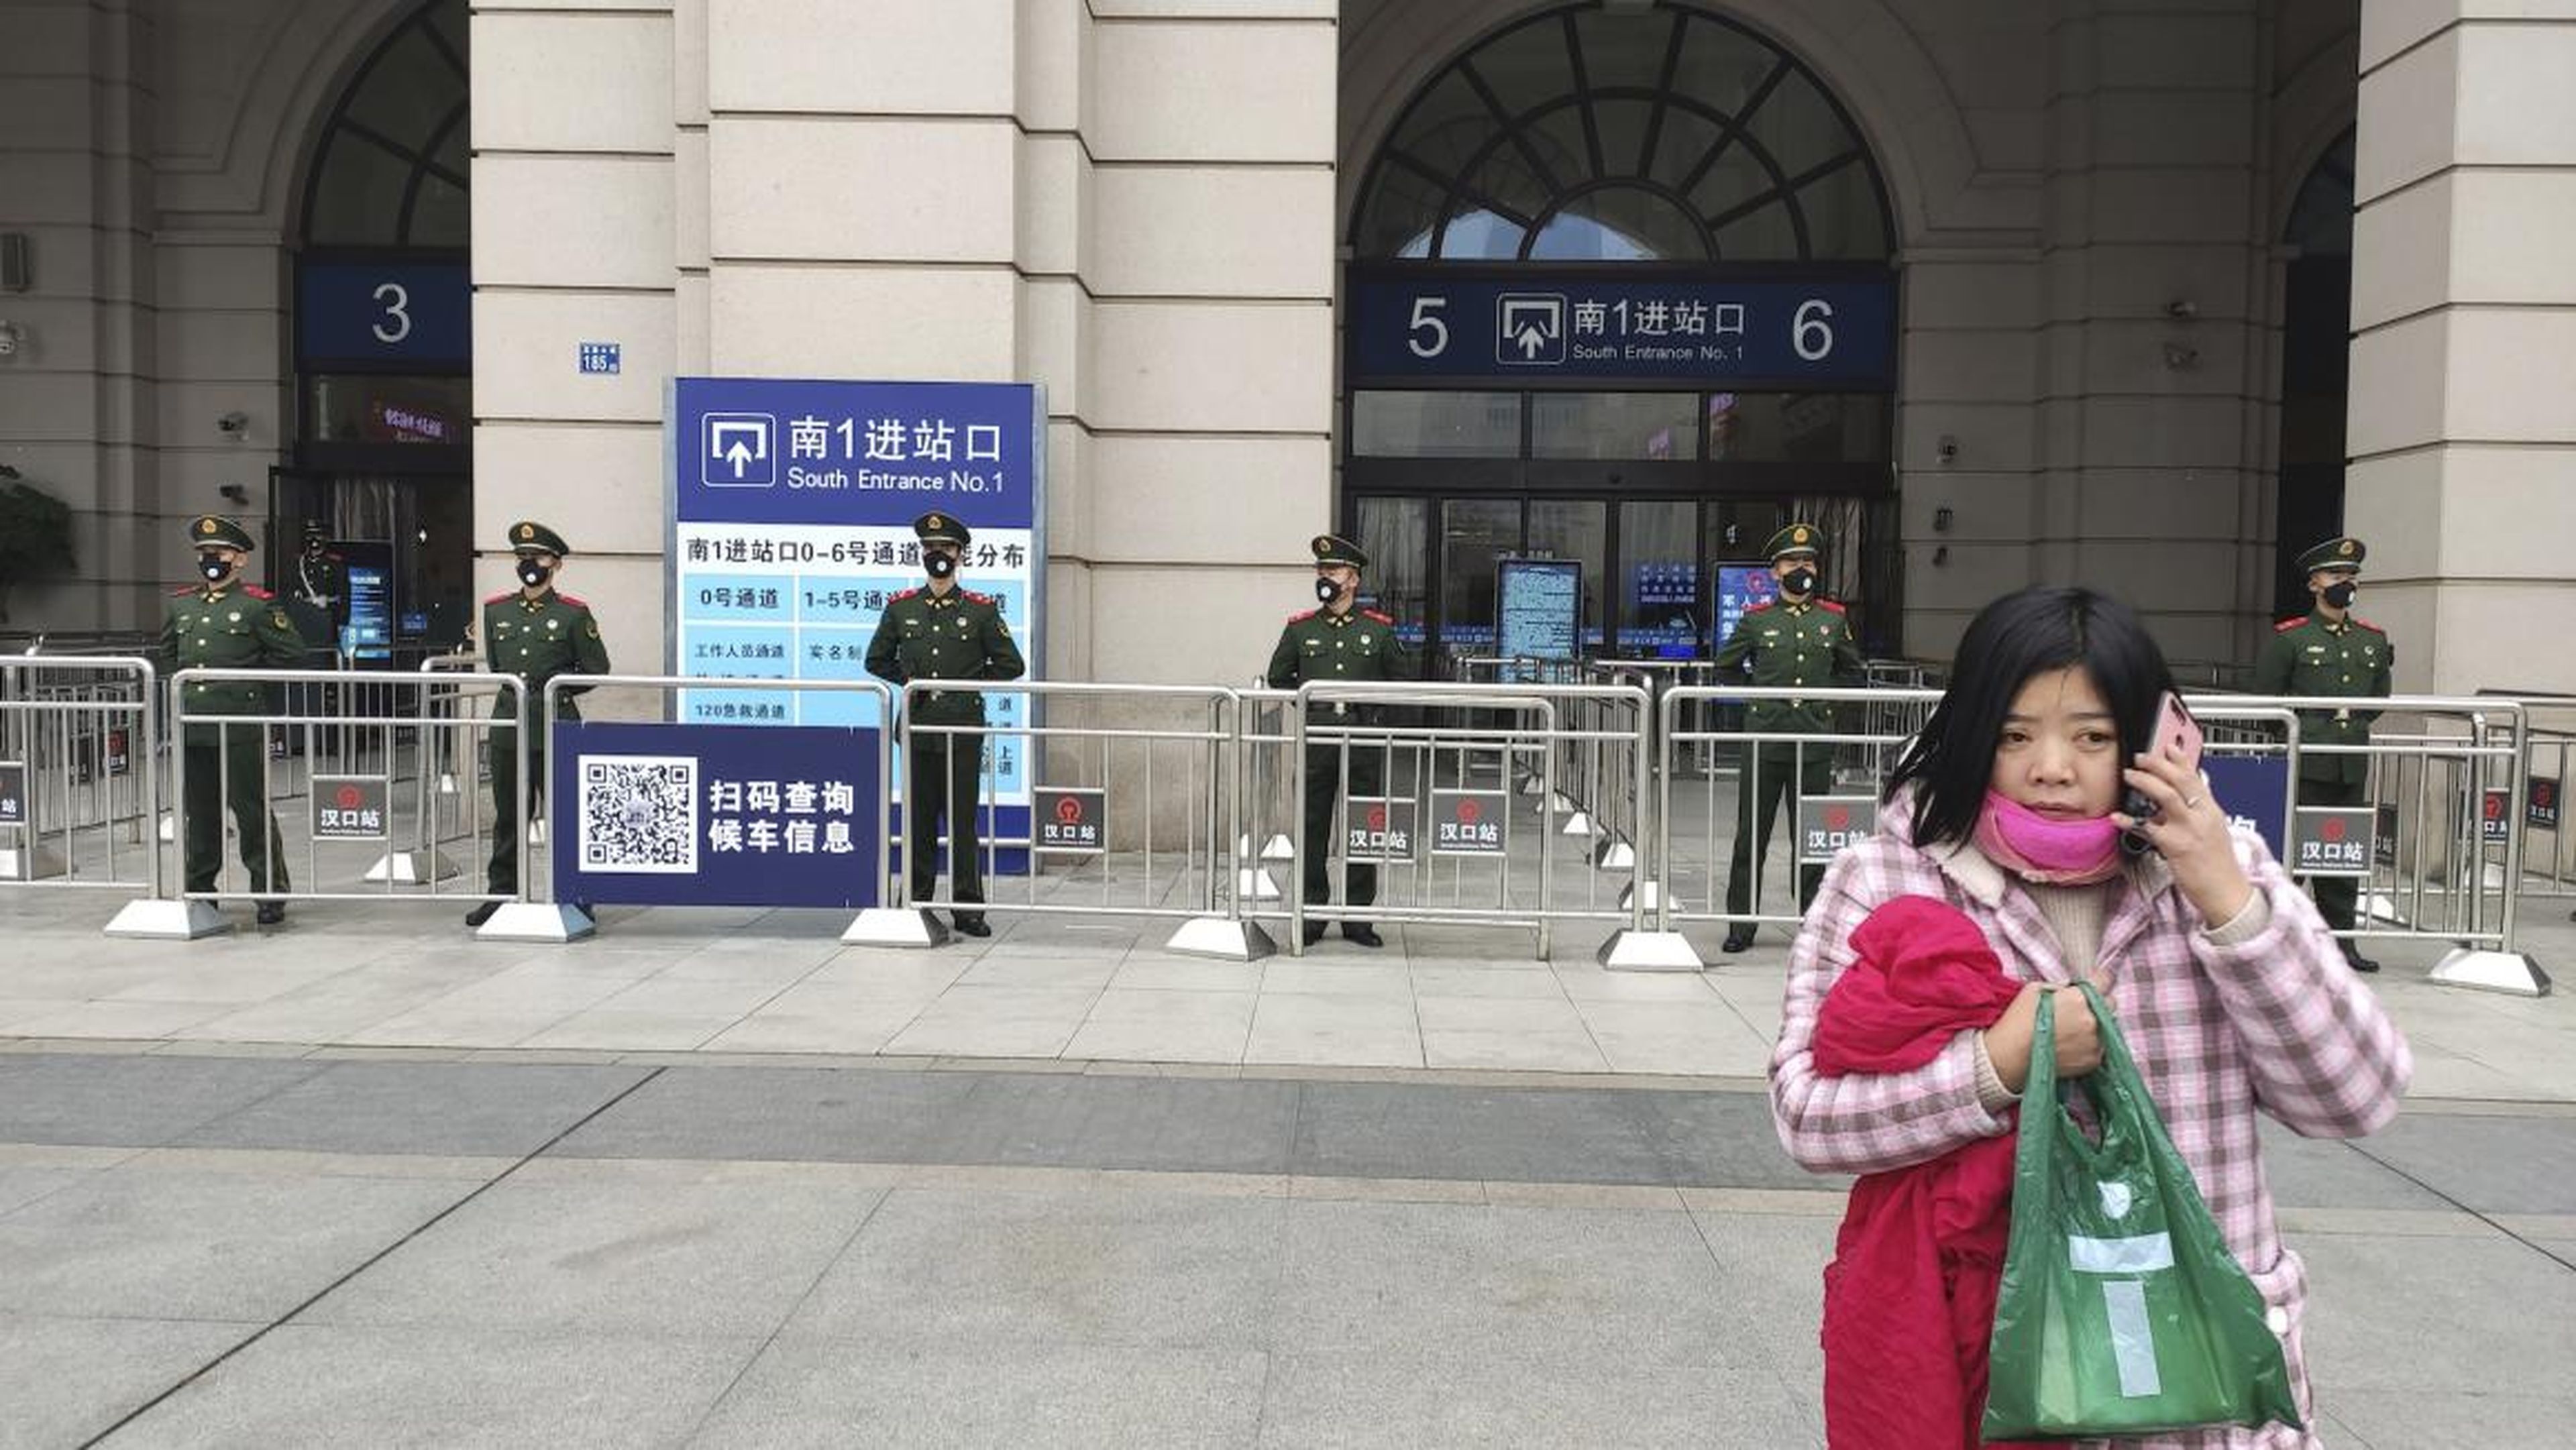 A woman talks on her cellphone as Chinese paramilitary police stand guard at an entrance to the closed Hankou Railway Station in Wuhan in central China's Hubei Province, Thursday, Jan. 23, 2020.